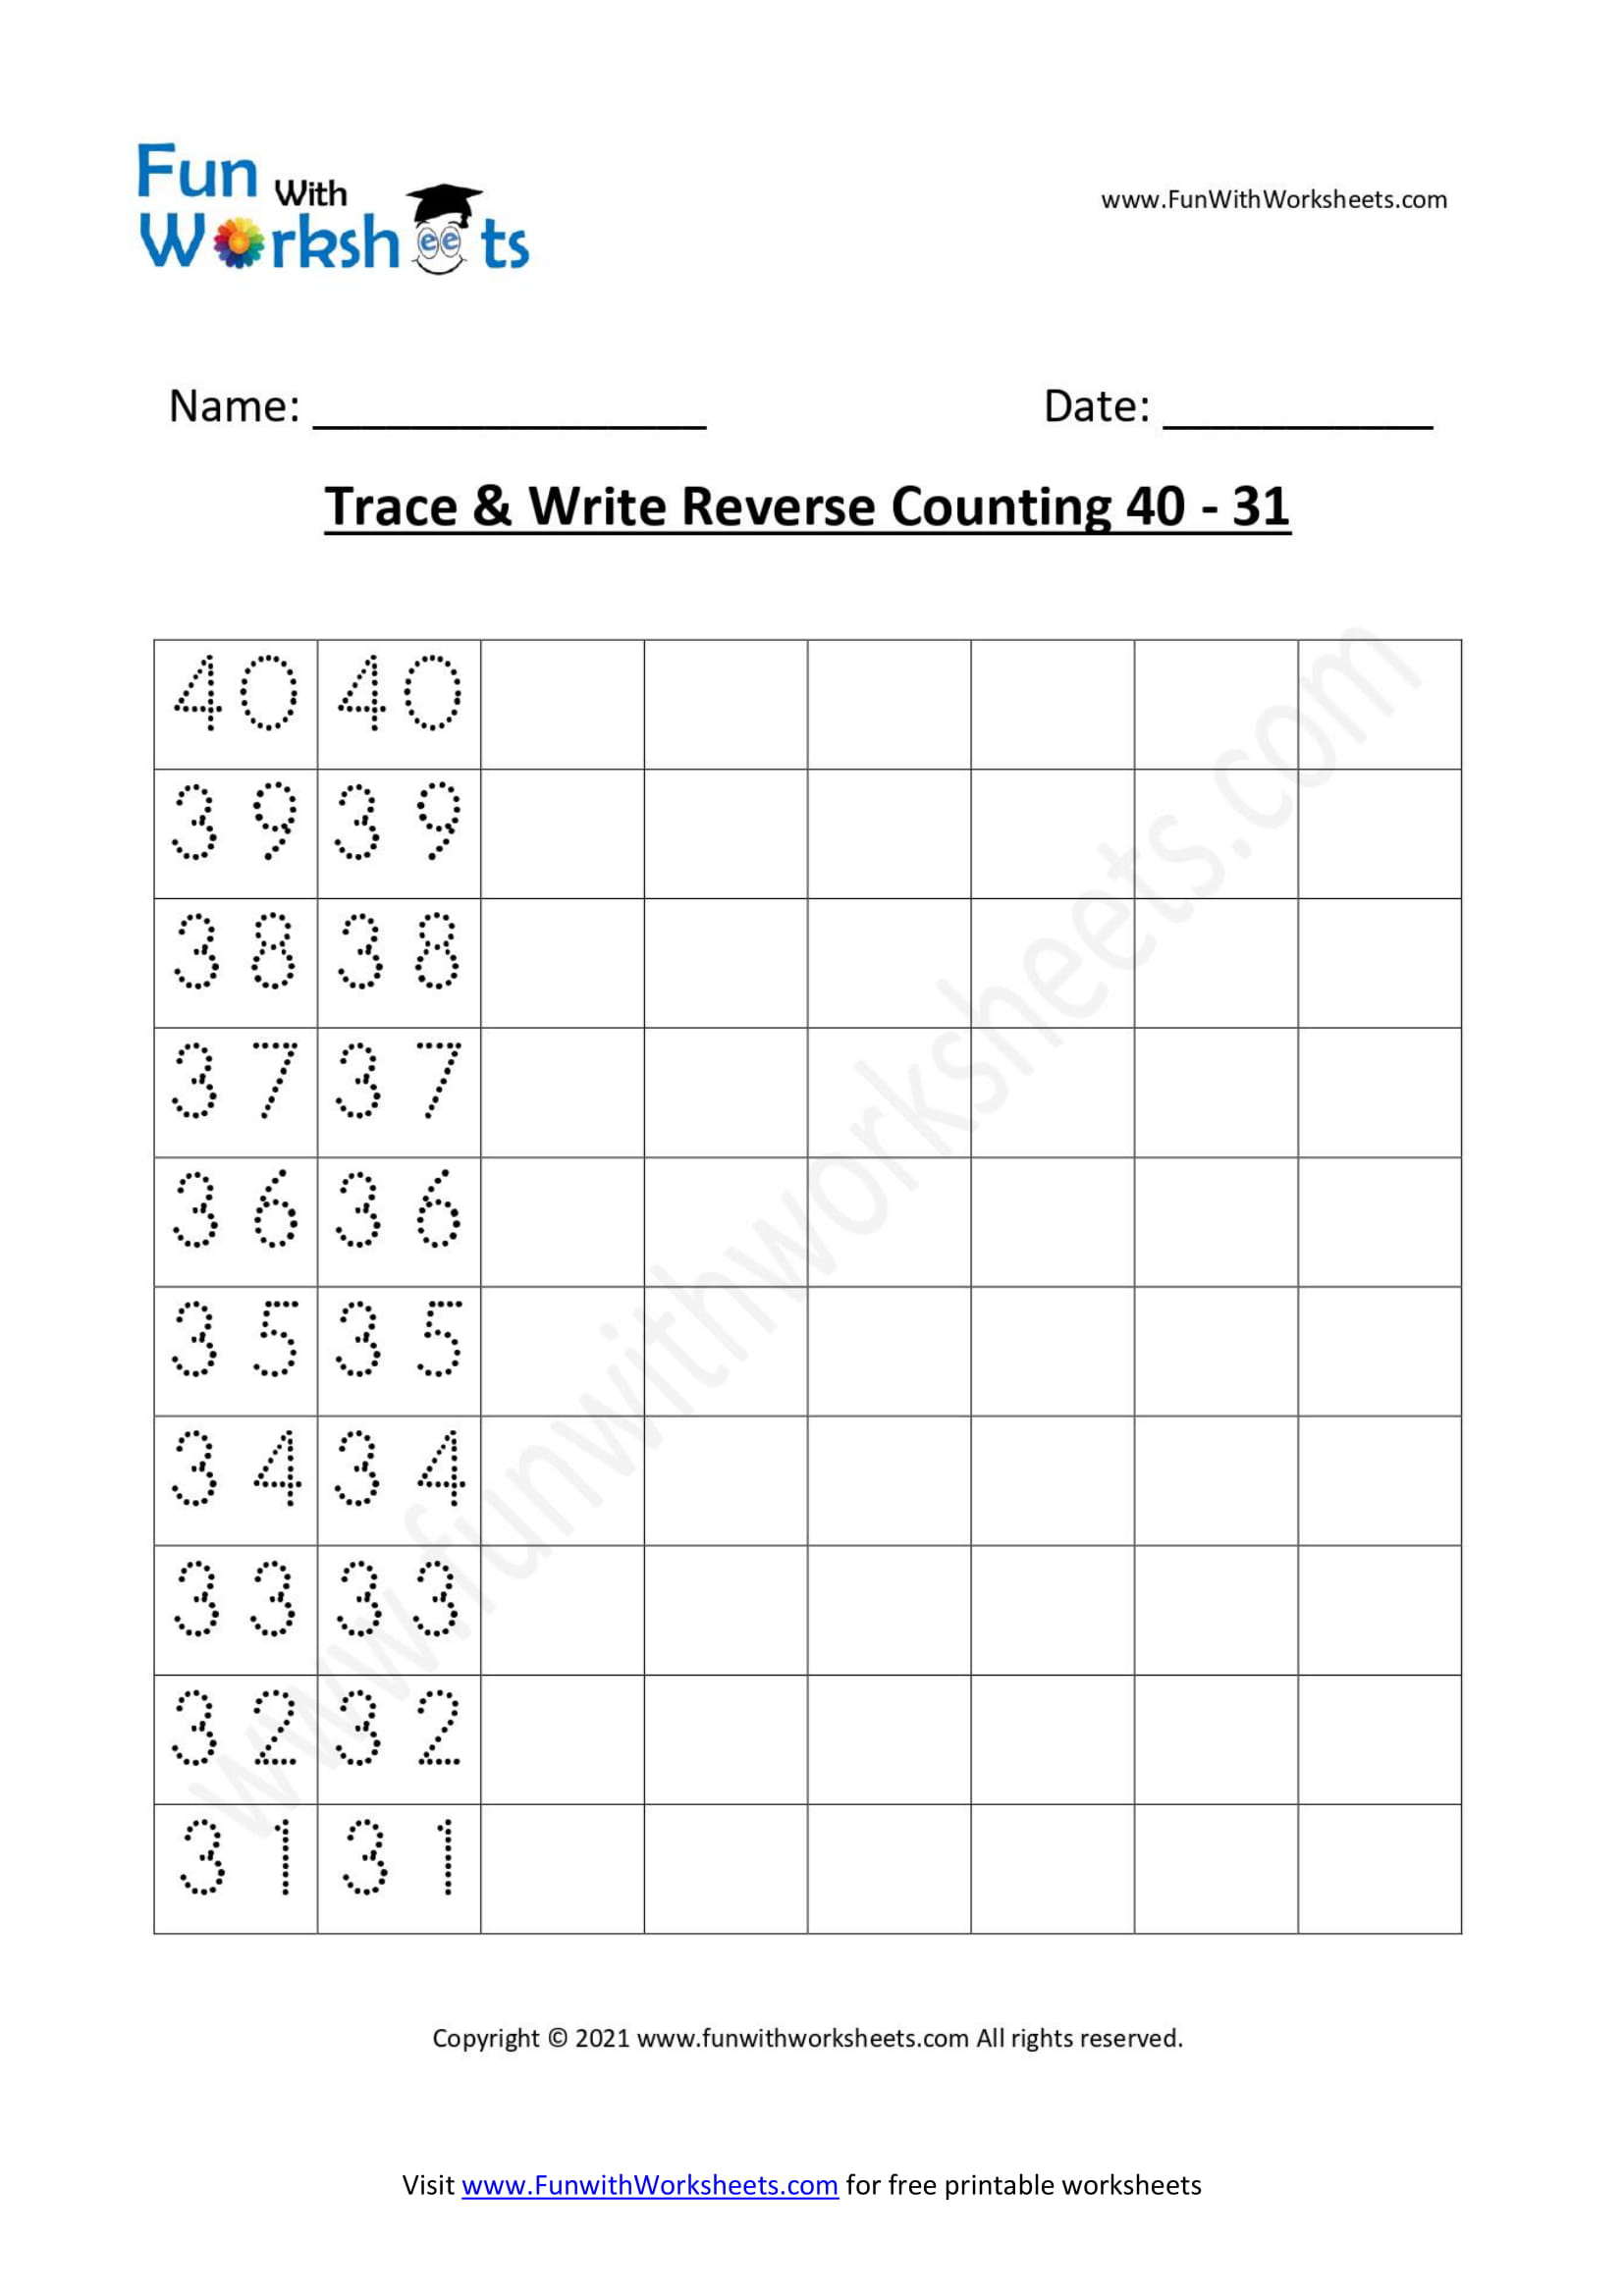 Trace And Learn Reverse Counting 40 31 Funwithworksheets